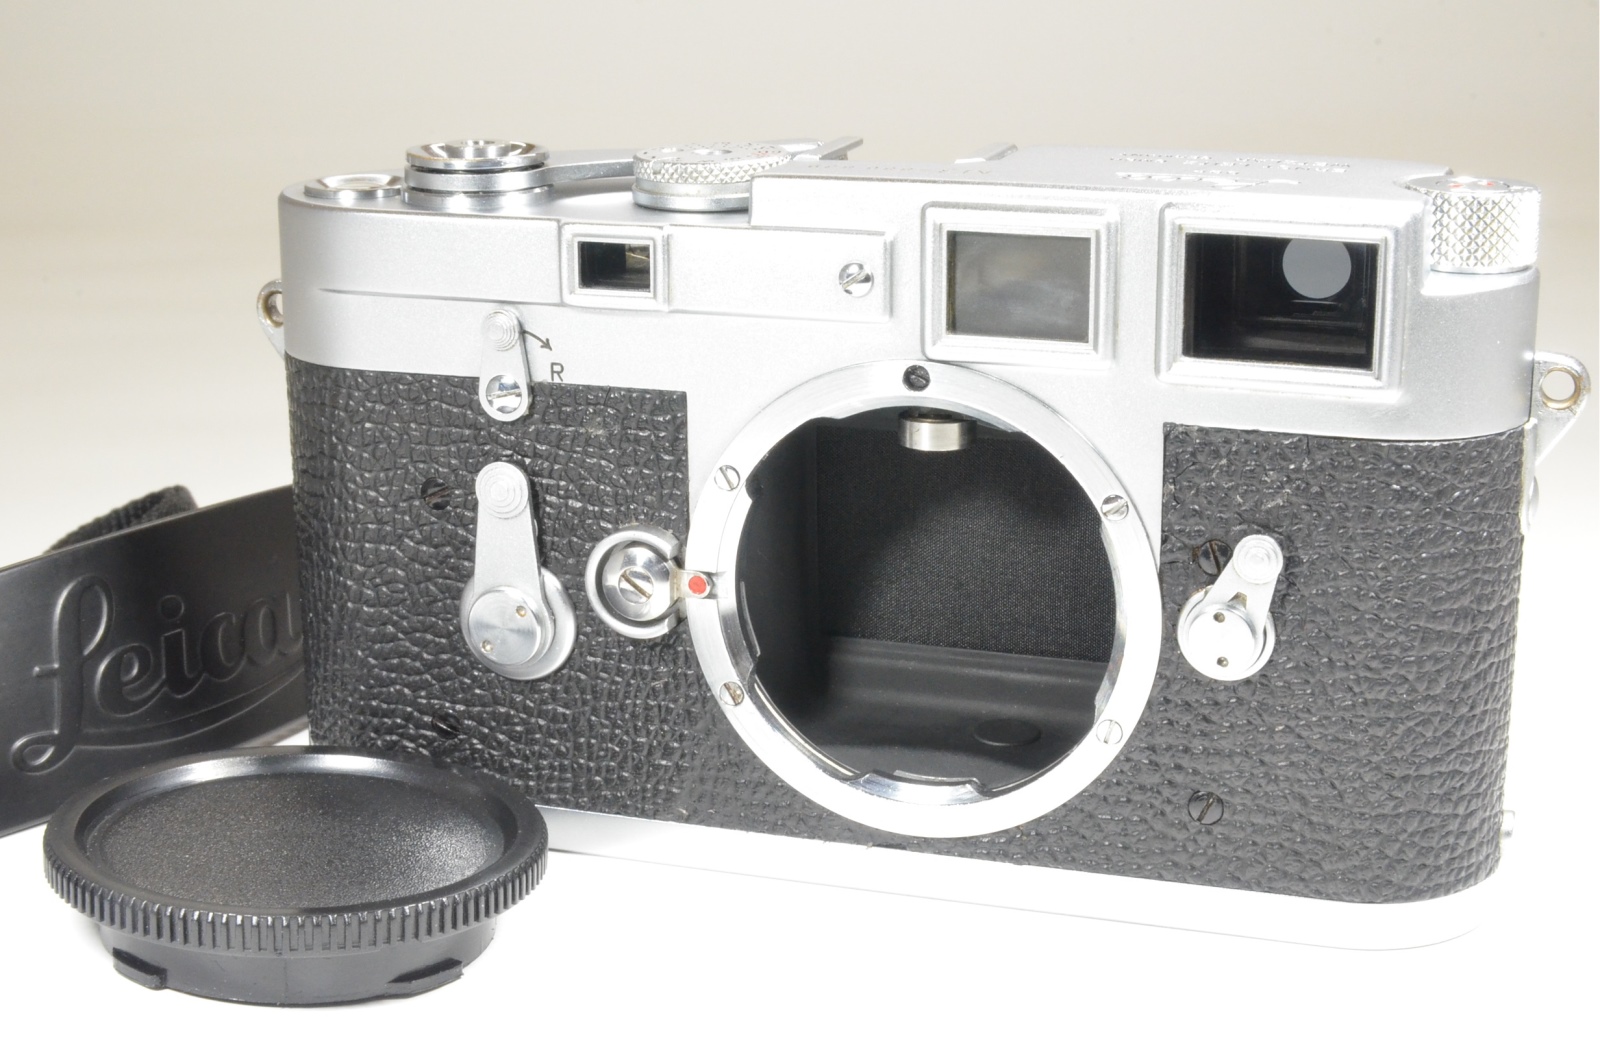 leica m3 double stroke s/n 886839 year 1957 with strap